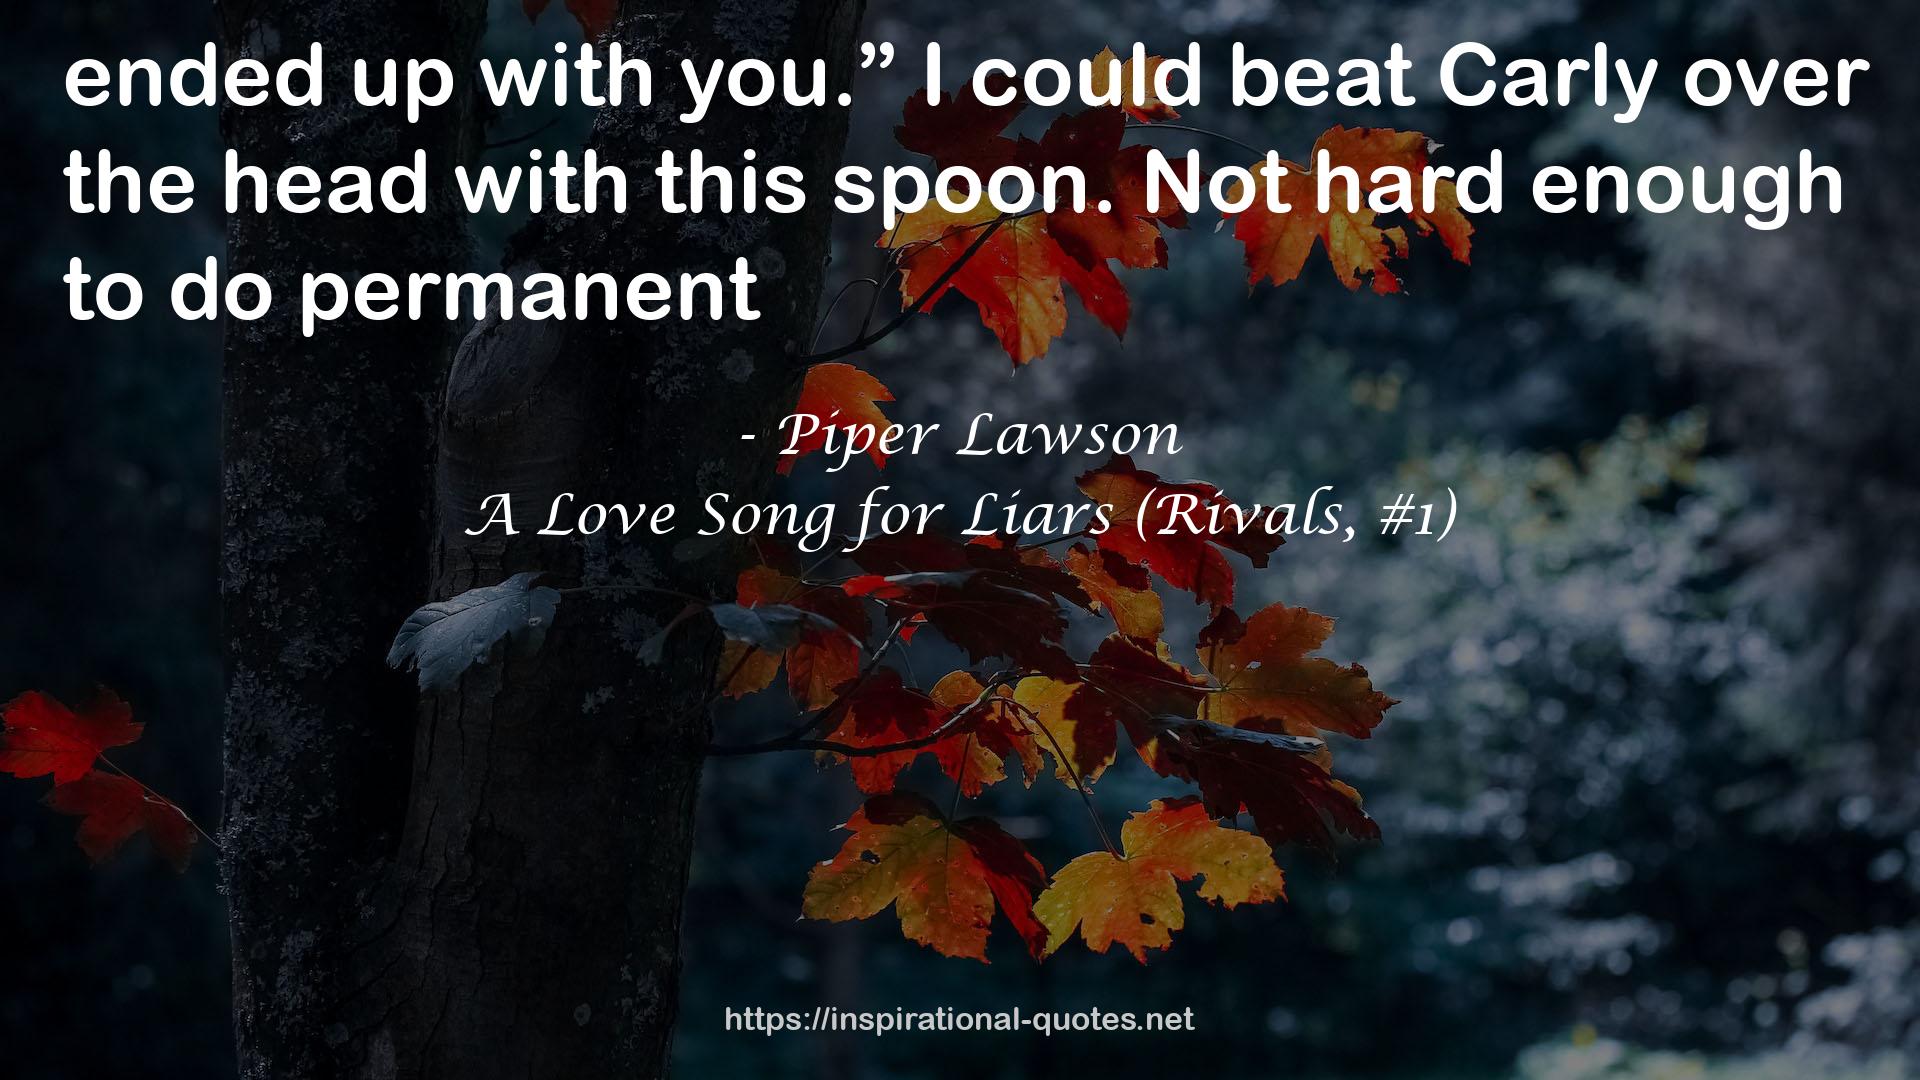 A Love Song for Liars (Rivals, #1) QUOTES